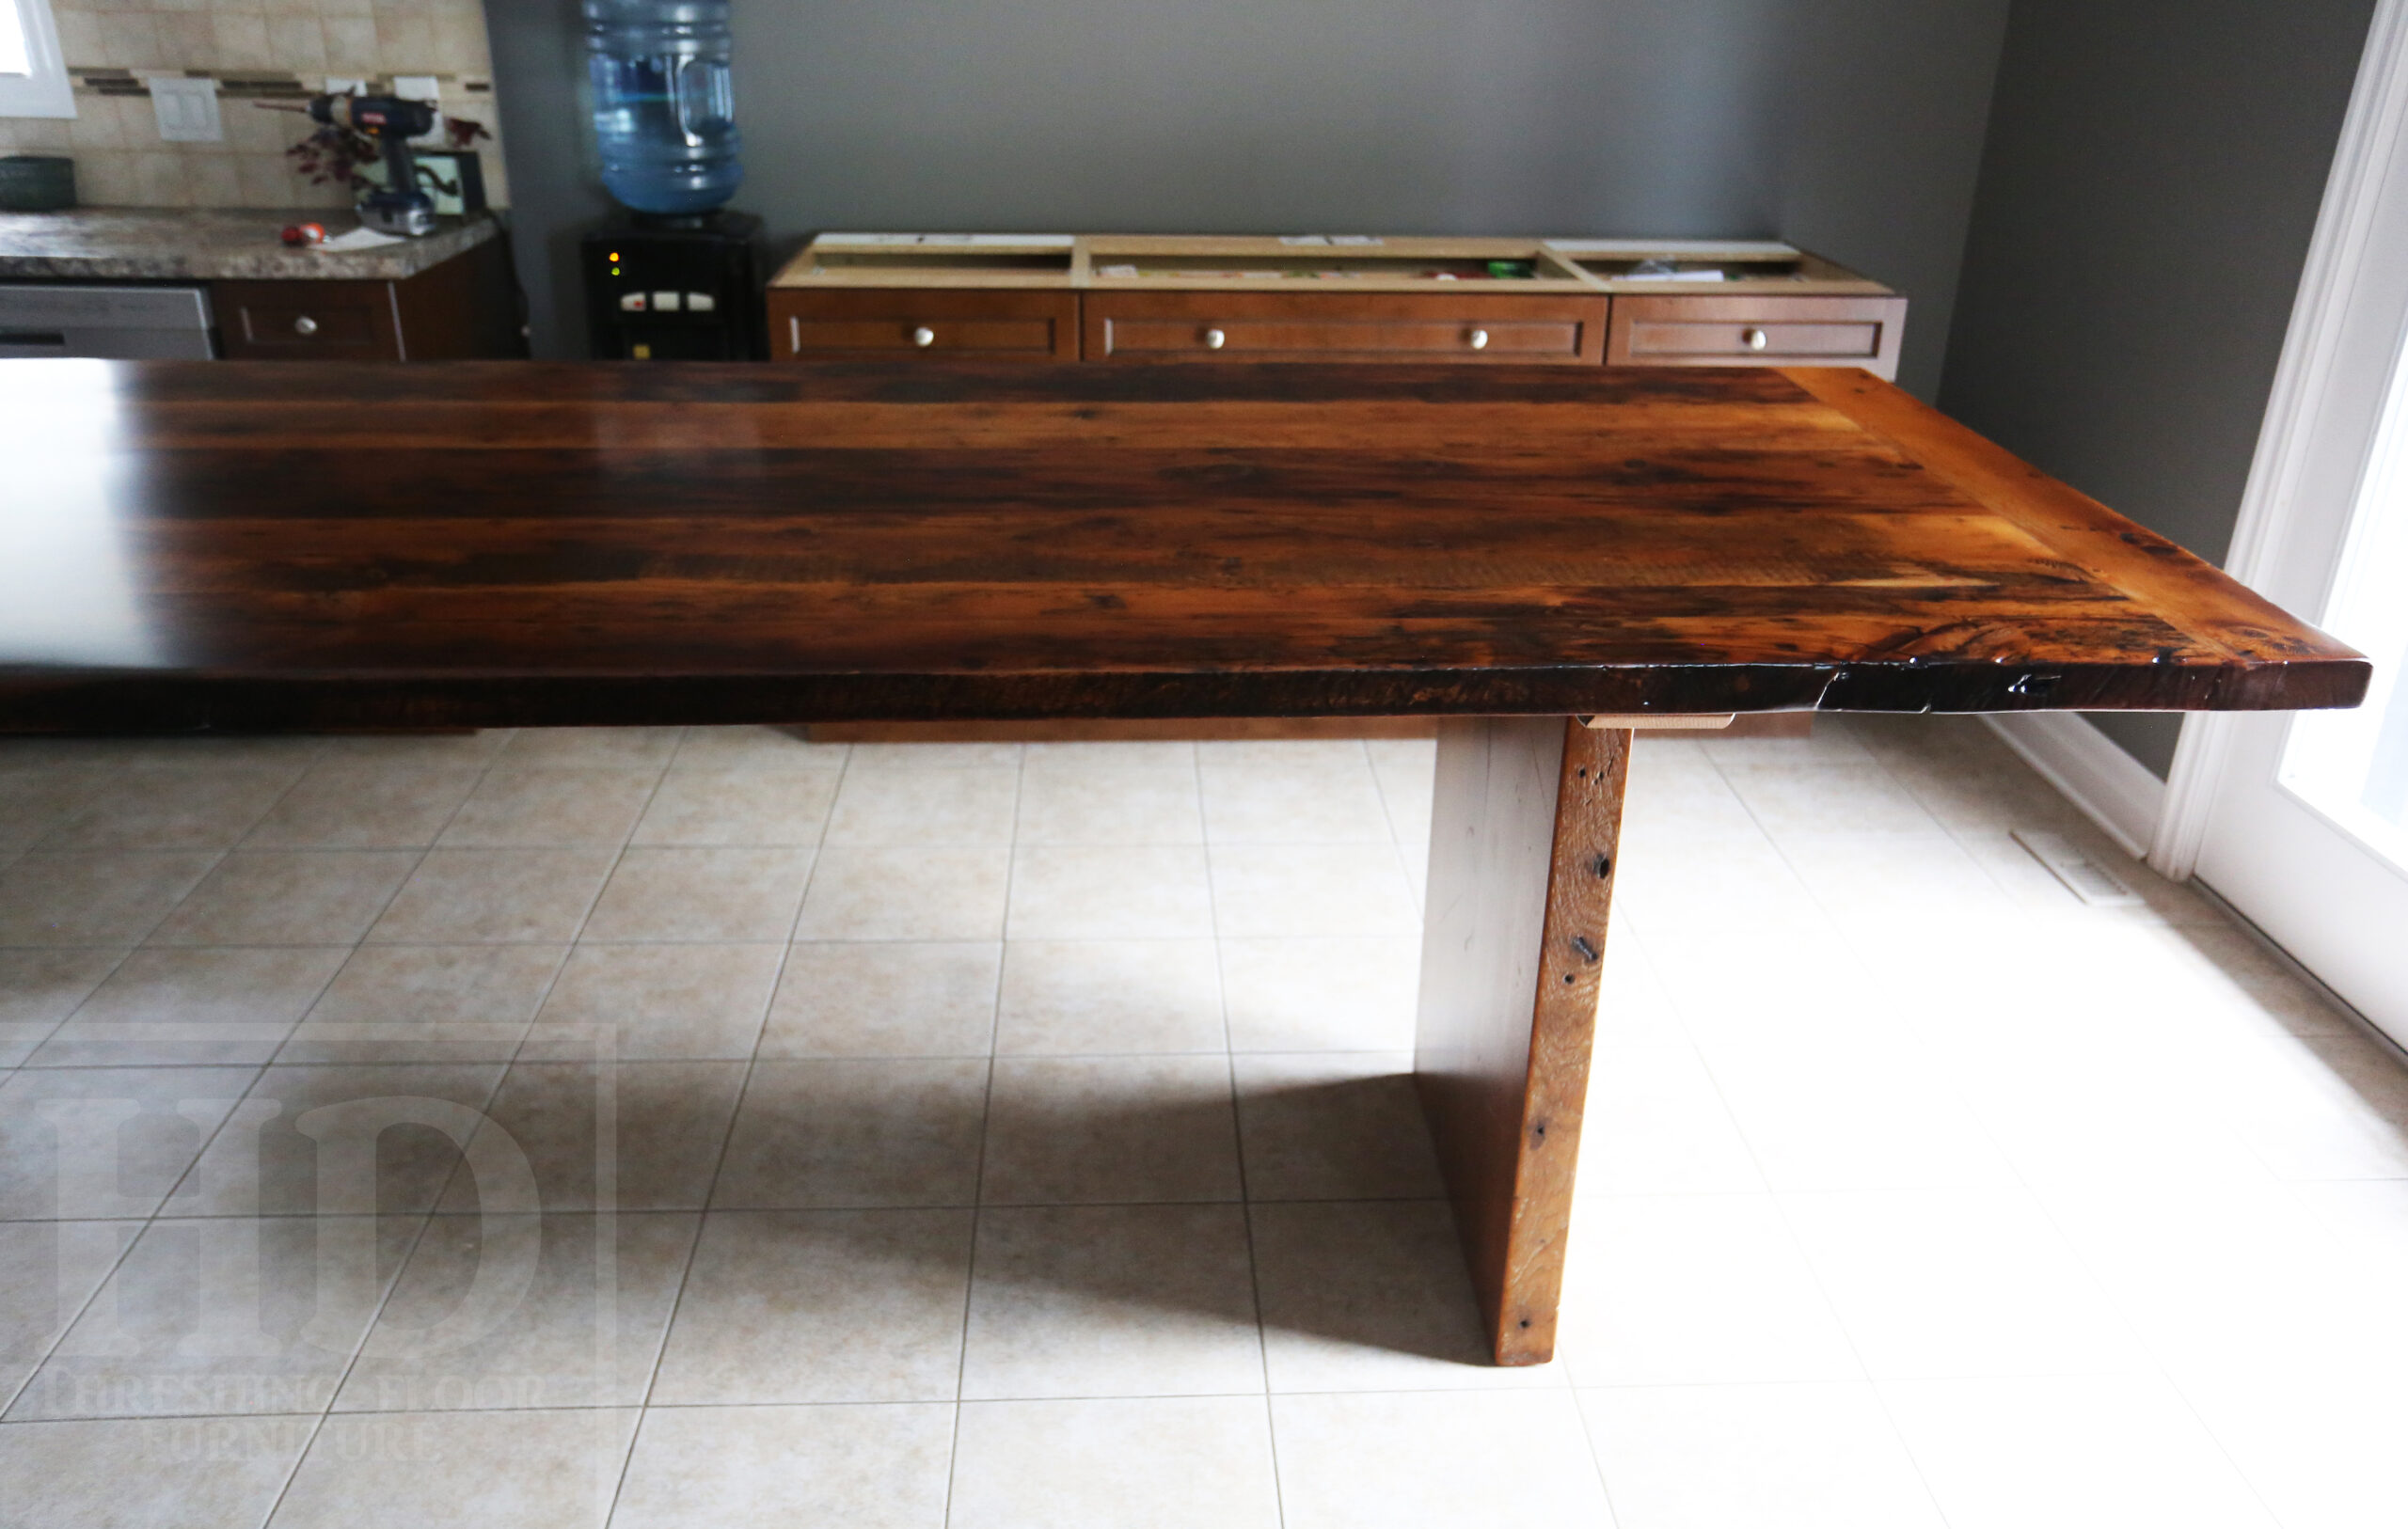 10' Ontario Barnwood Modern Table we made for an Innerskip, Ontario home - 42" wide - 36" [Counter] Height - Plank Base - 2" Hemlock Threshing Floor Top - Original edges & distressing maintained - Premium epoxy + satin polyurethane finish - www.table.ca